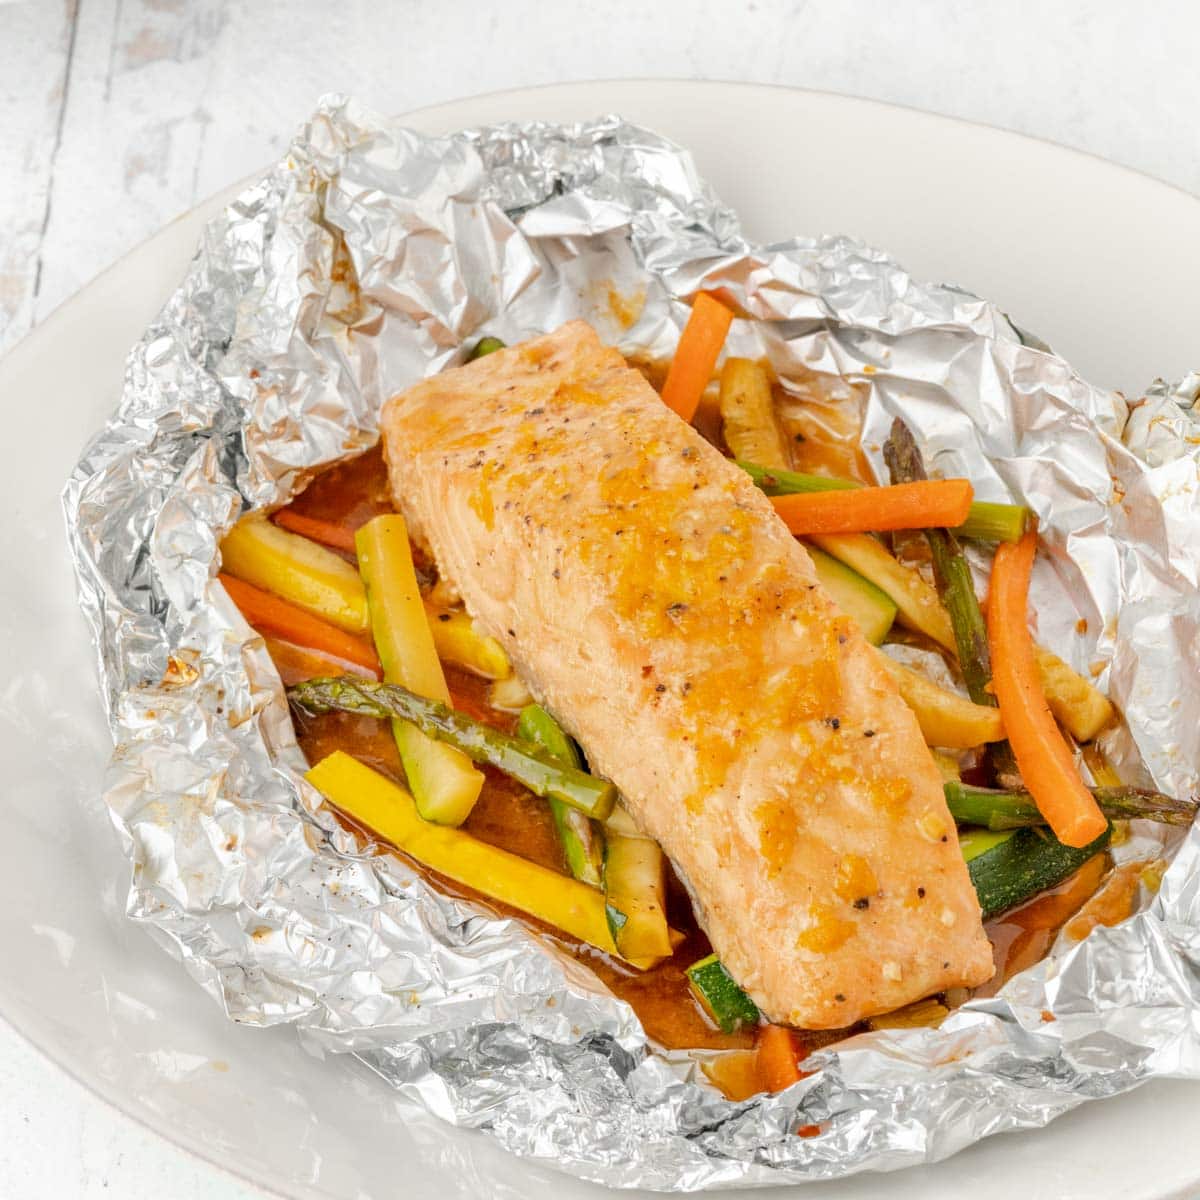 Salmon and vegetables baked in foil, with foil cut open to show inside